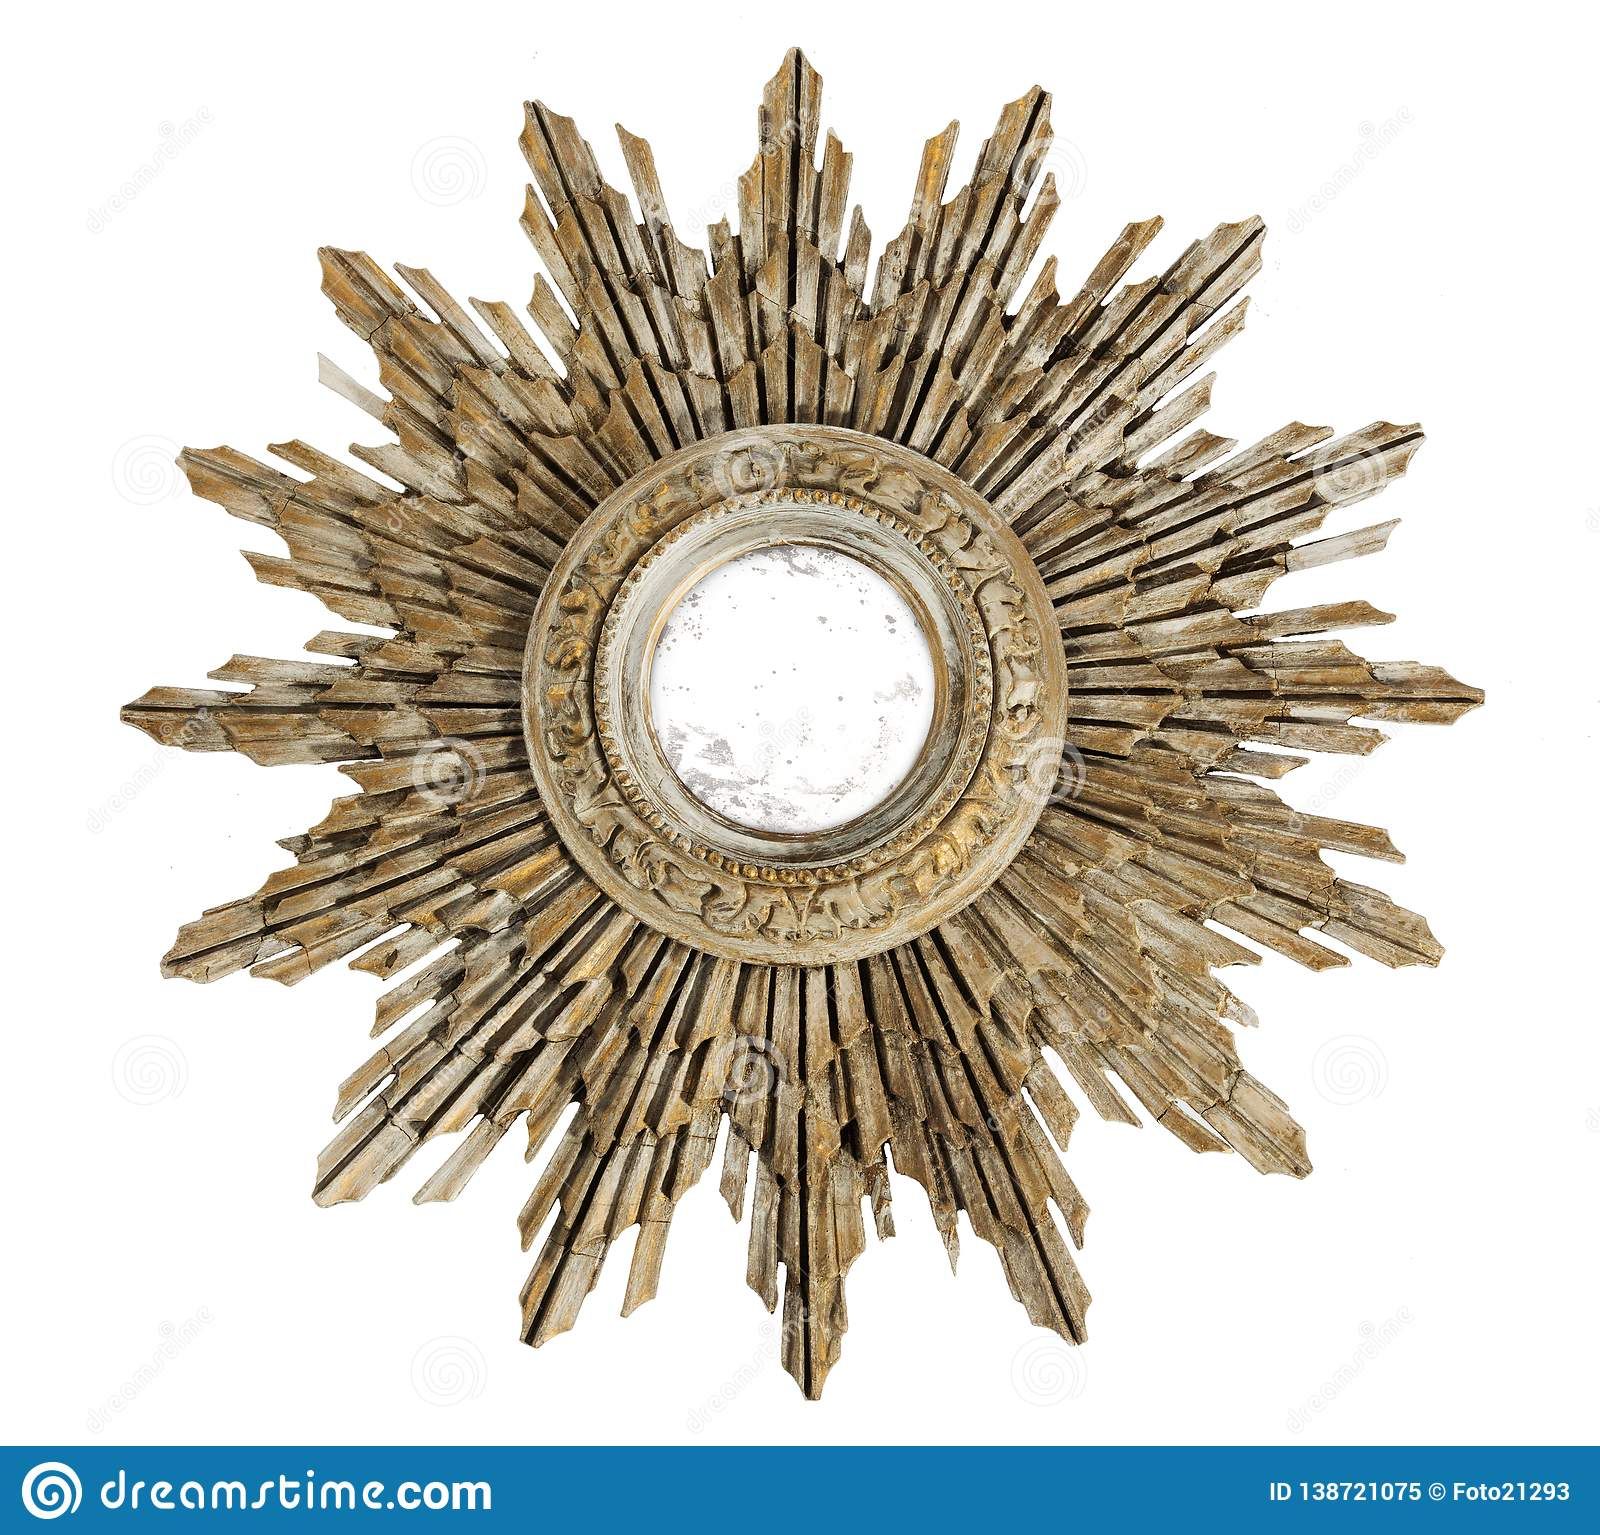 Old Star Burst Mirror Wooden Painted Stock Image – Image Of Antique Inside Perillo Burst Wood Accent Mirrors (View 7 of 15)